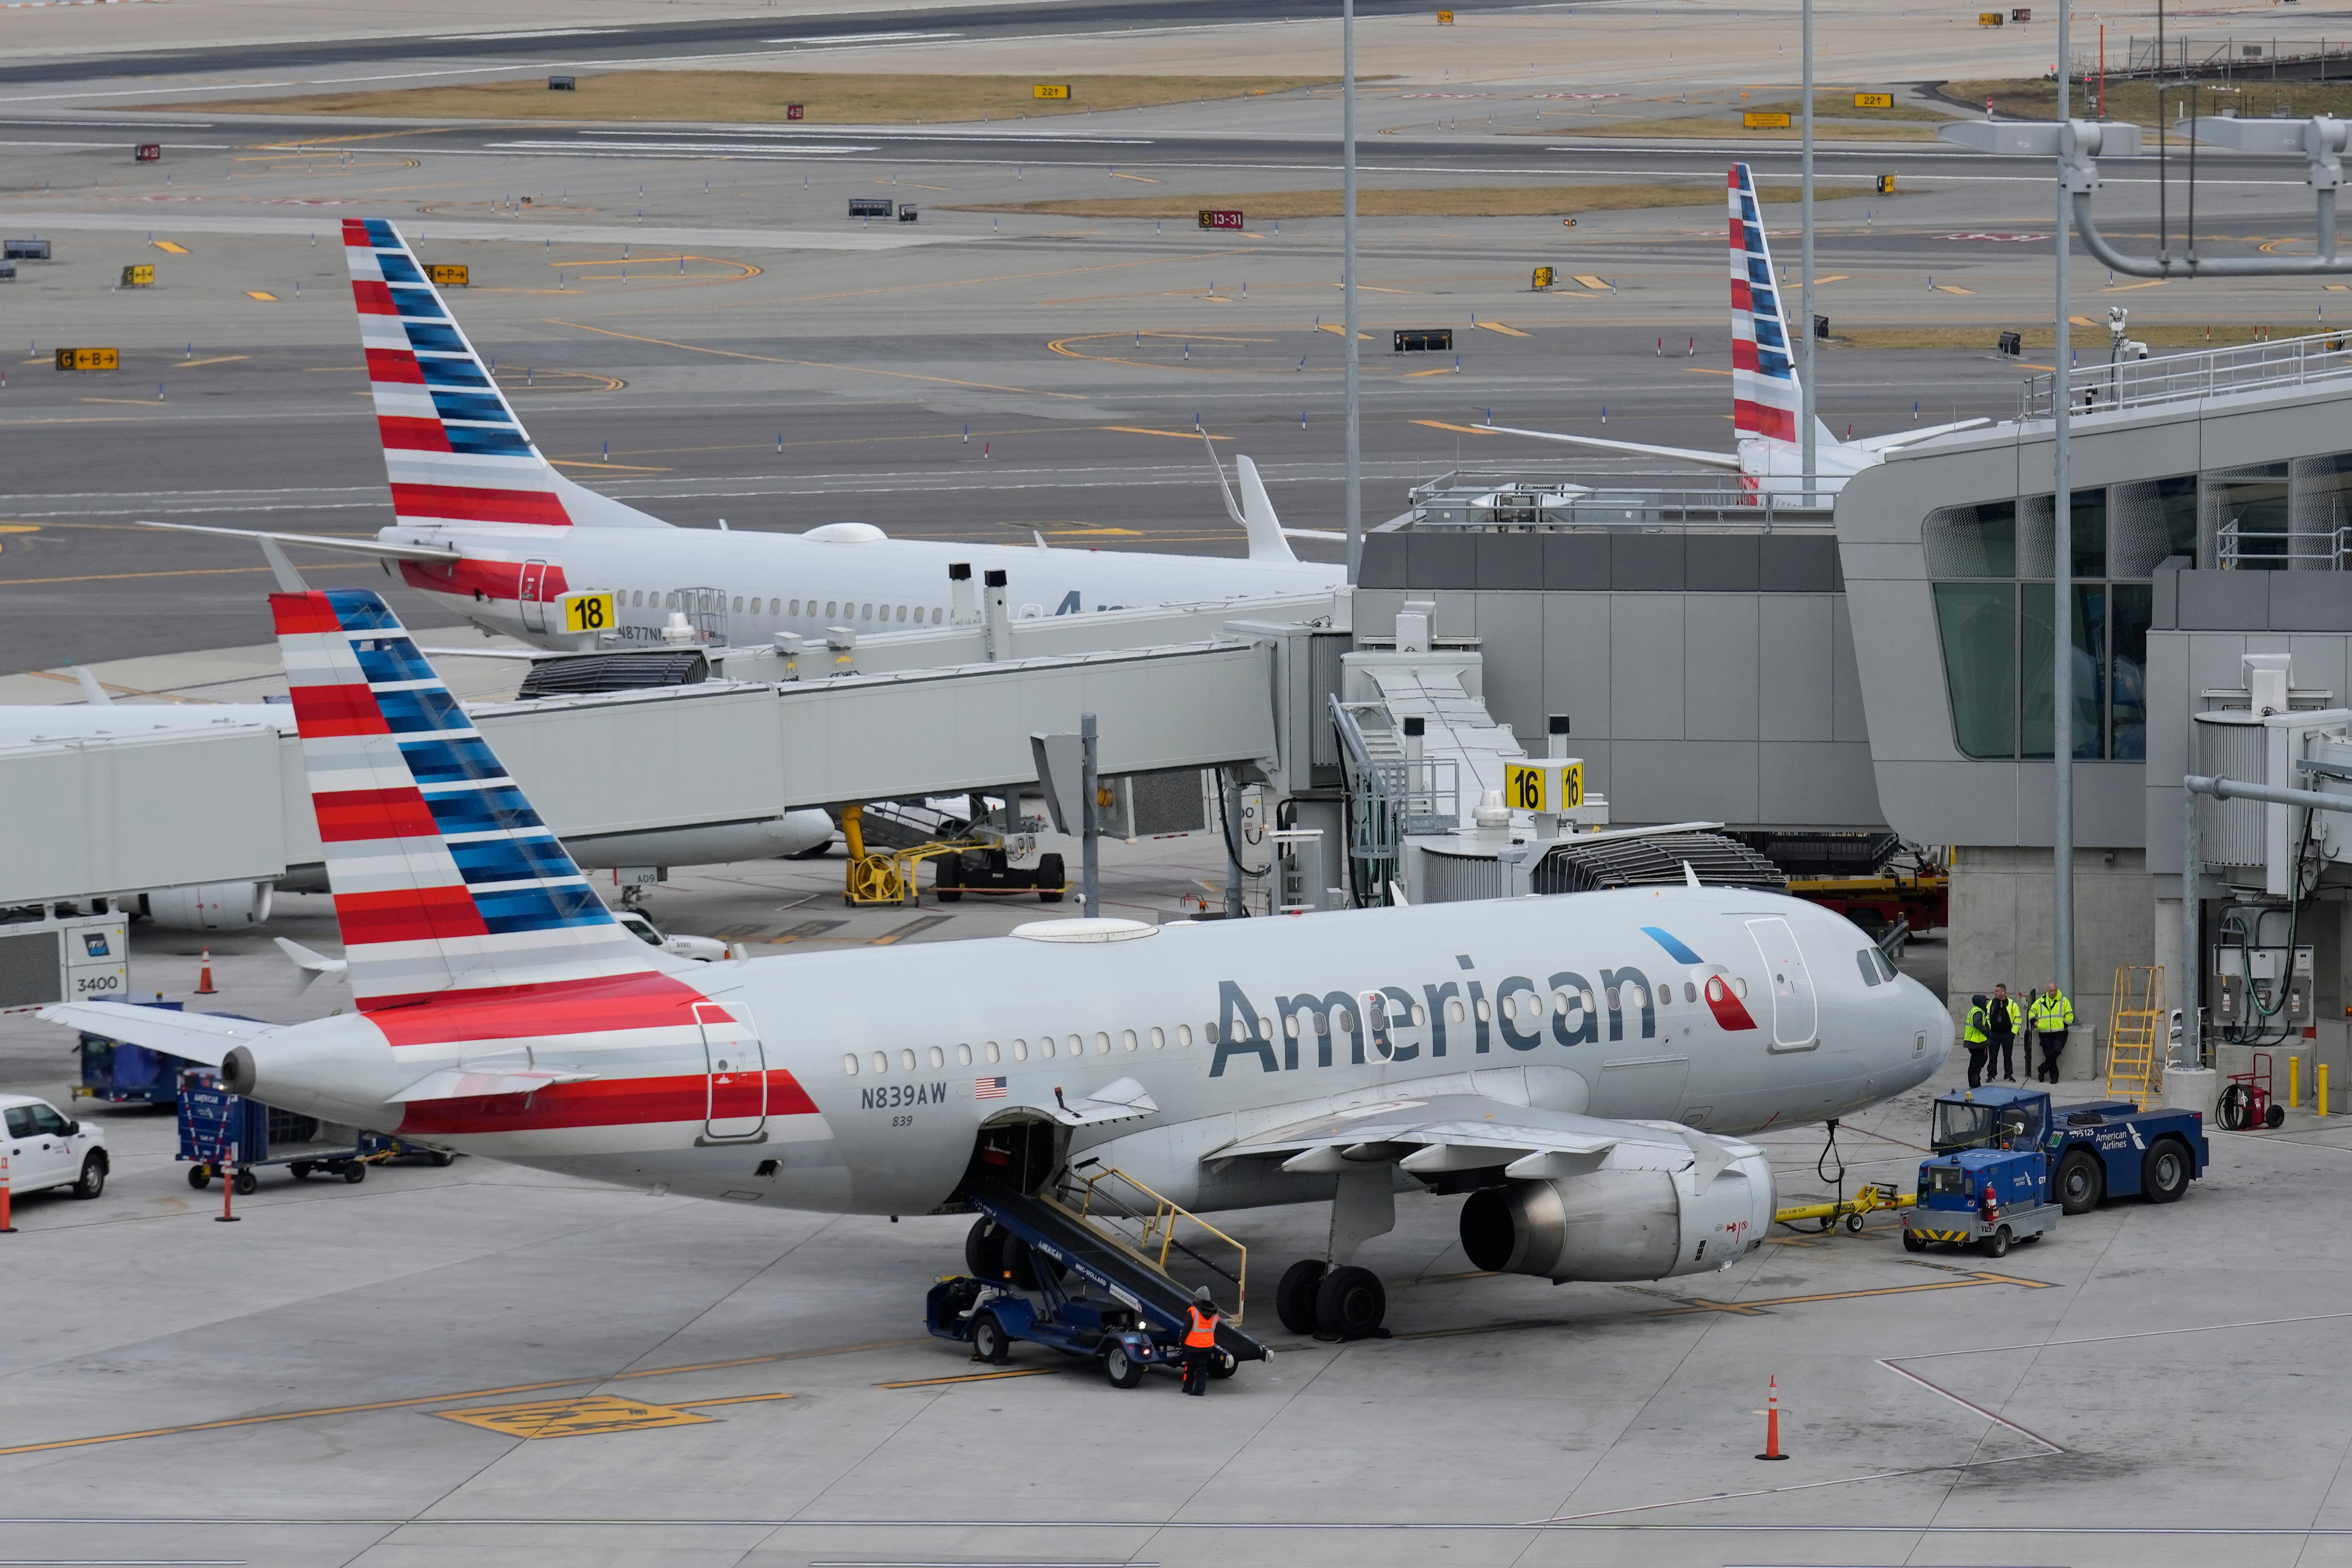 American Airlines flight attendant arrested for filming minors in plane toilet